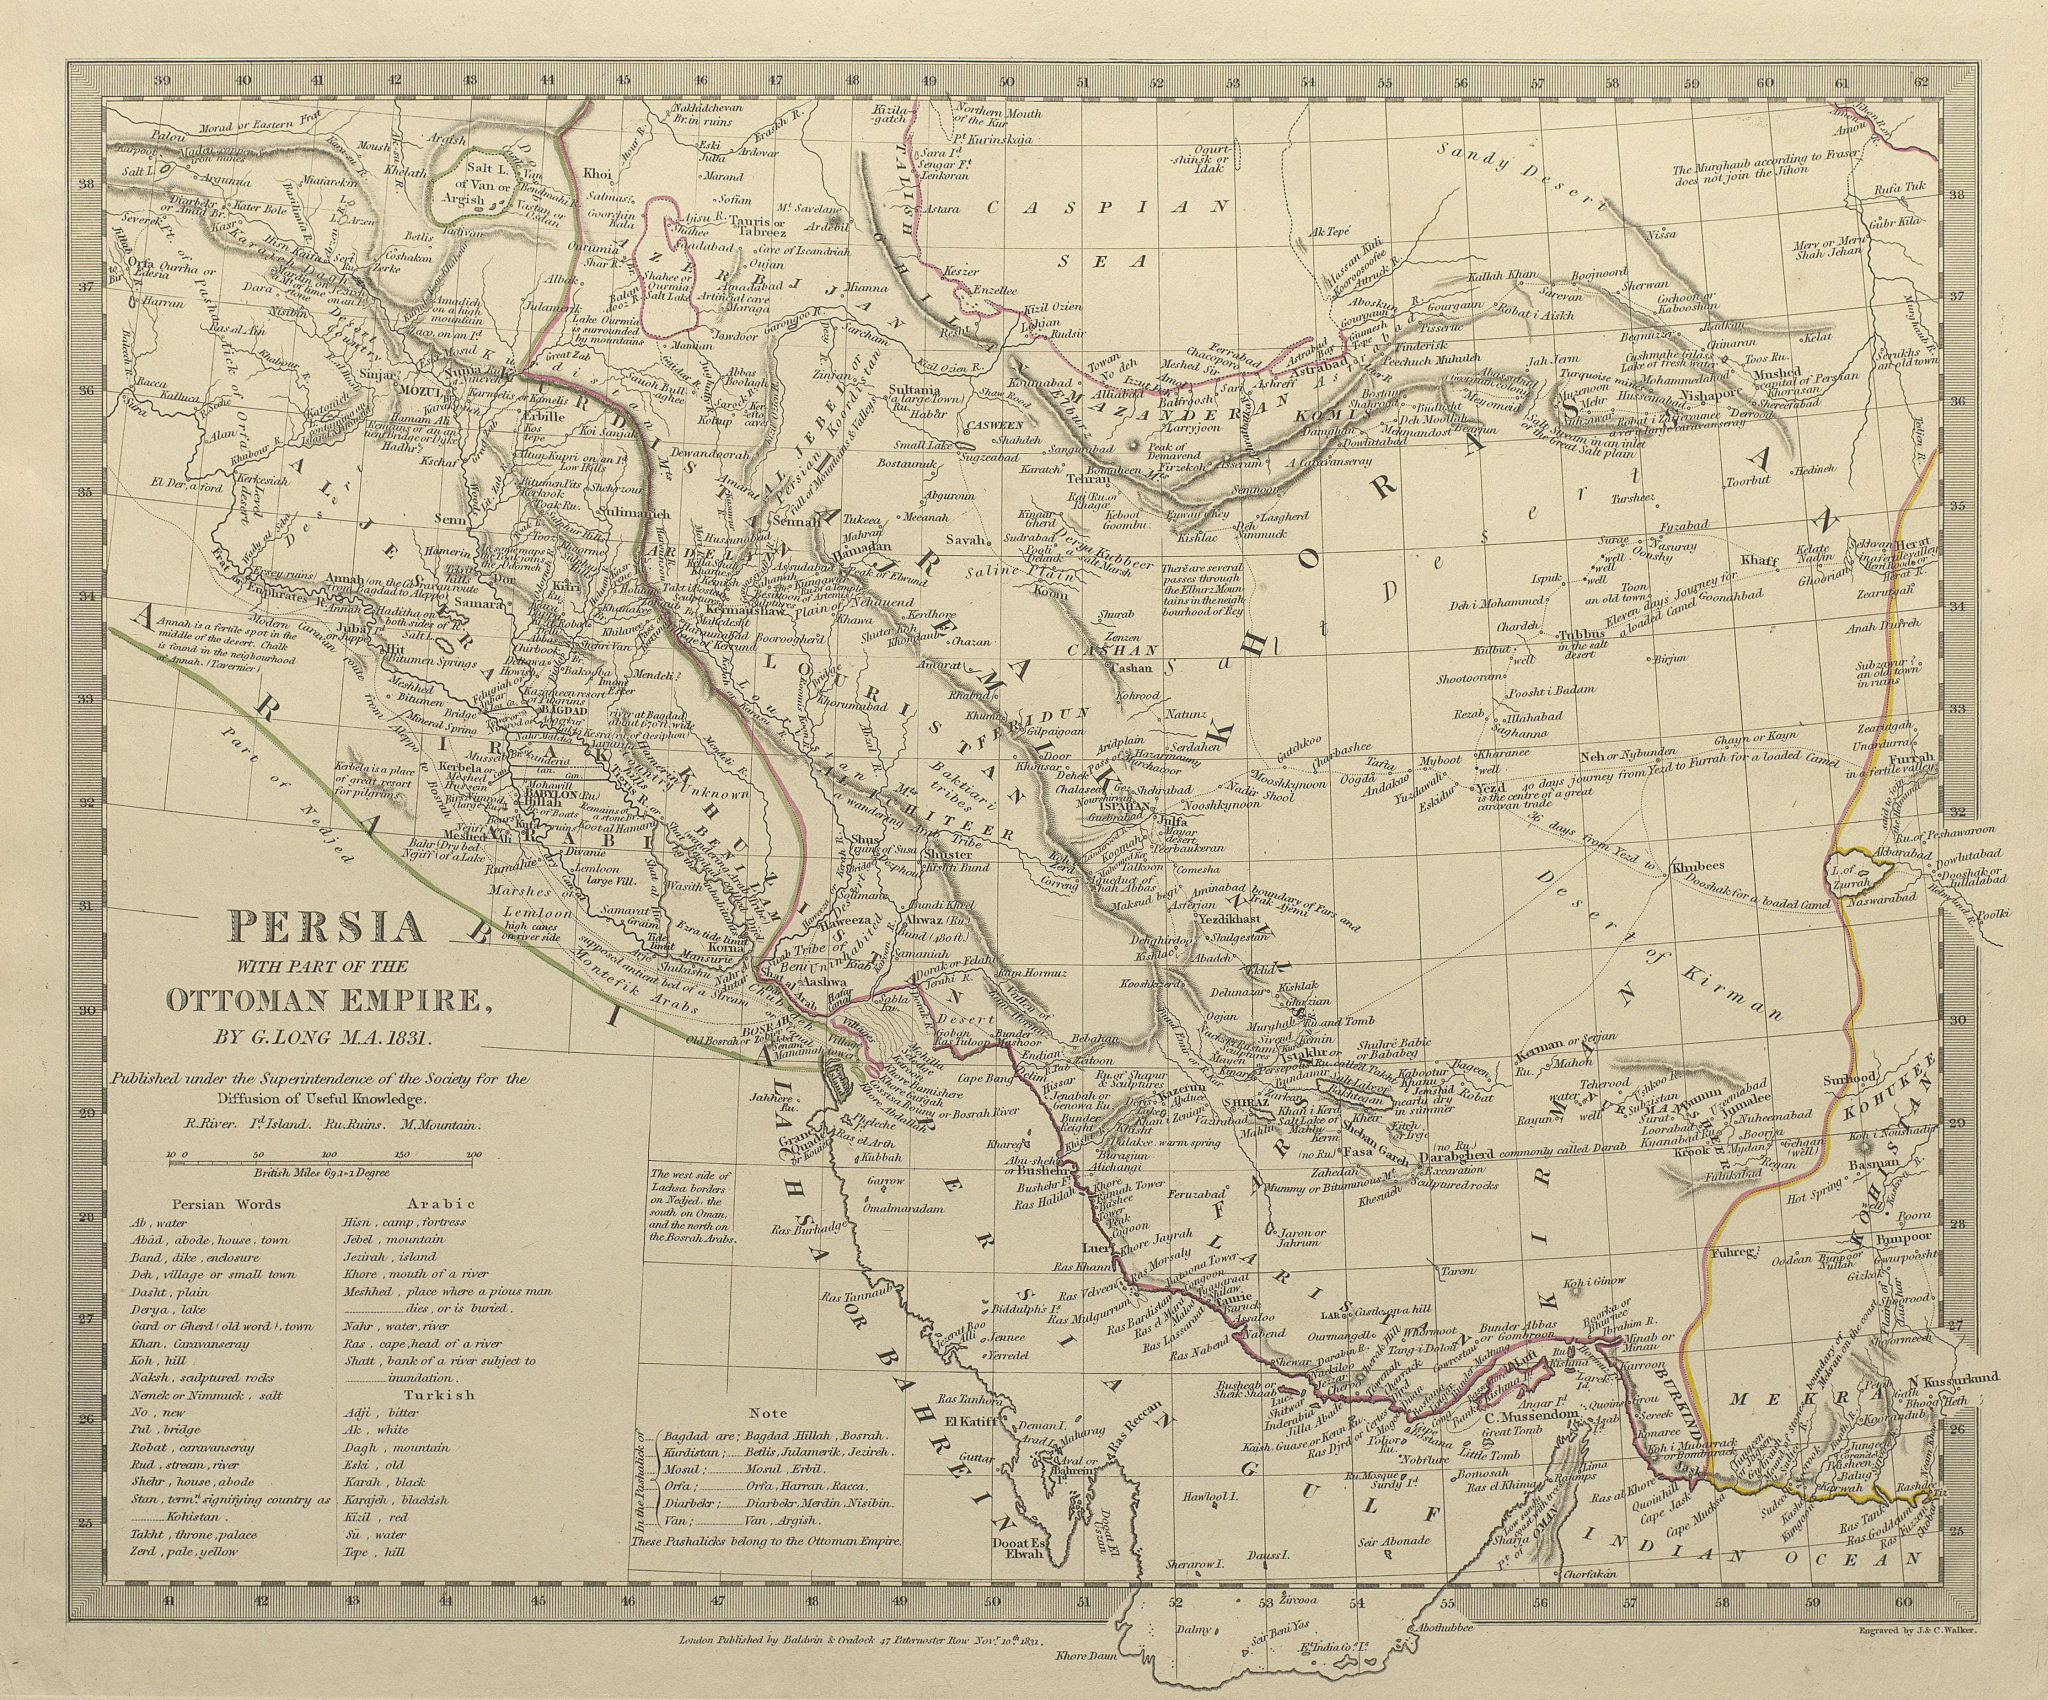 PERSIA (IRAN) . With part of the Ottoman Empire. Iraq. SDUK 1844 old map